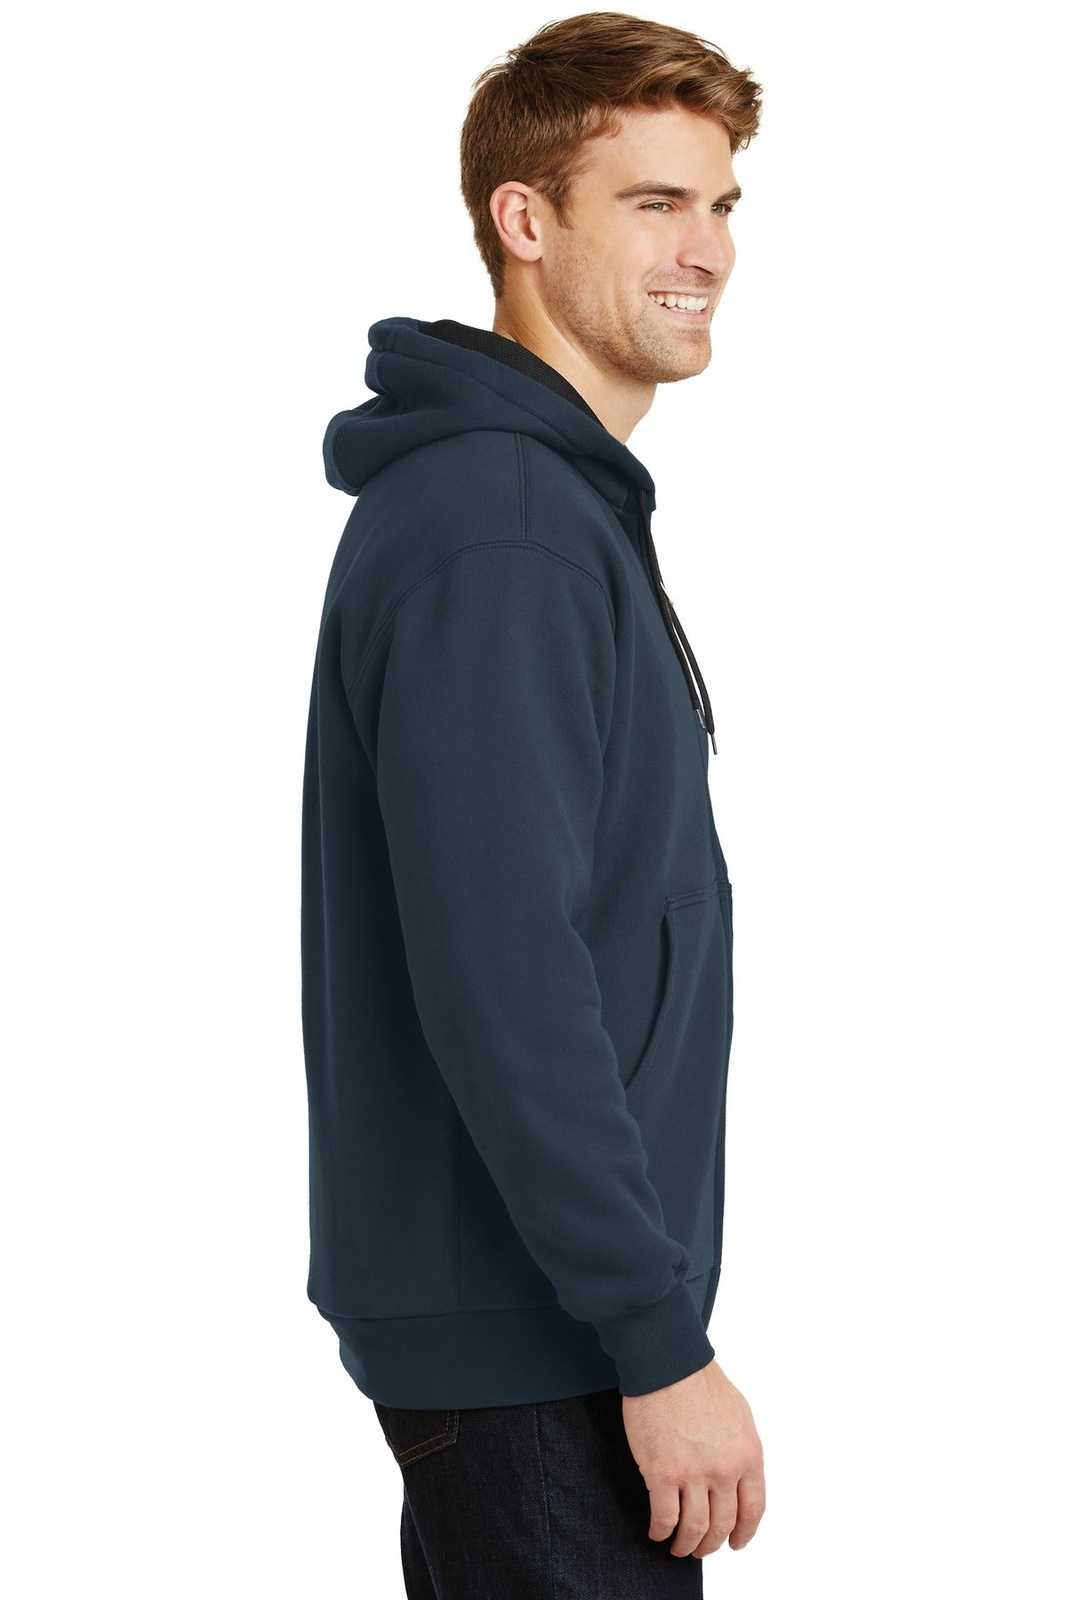 CornerStone CS620 Heavyweight Full-Zip Hooded Sweatshirt with Thermal Lining - Navy - HIT a Double - 3